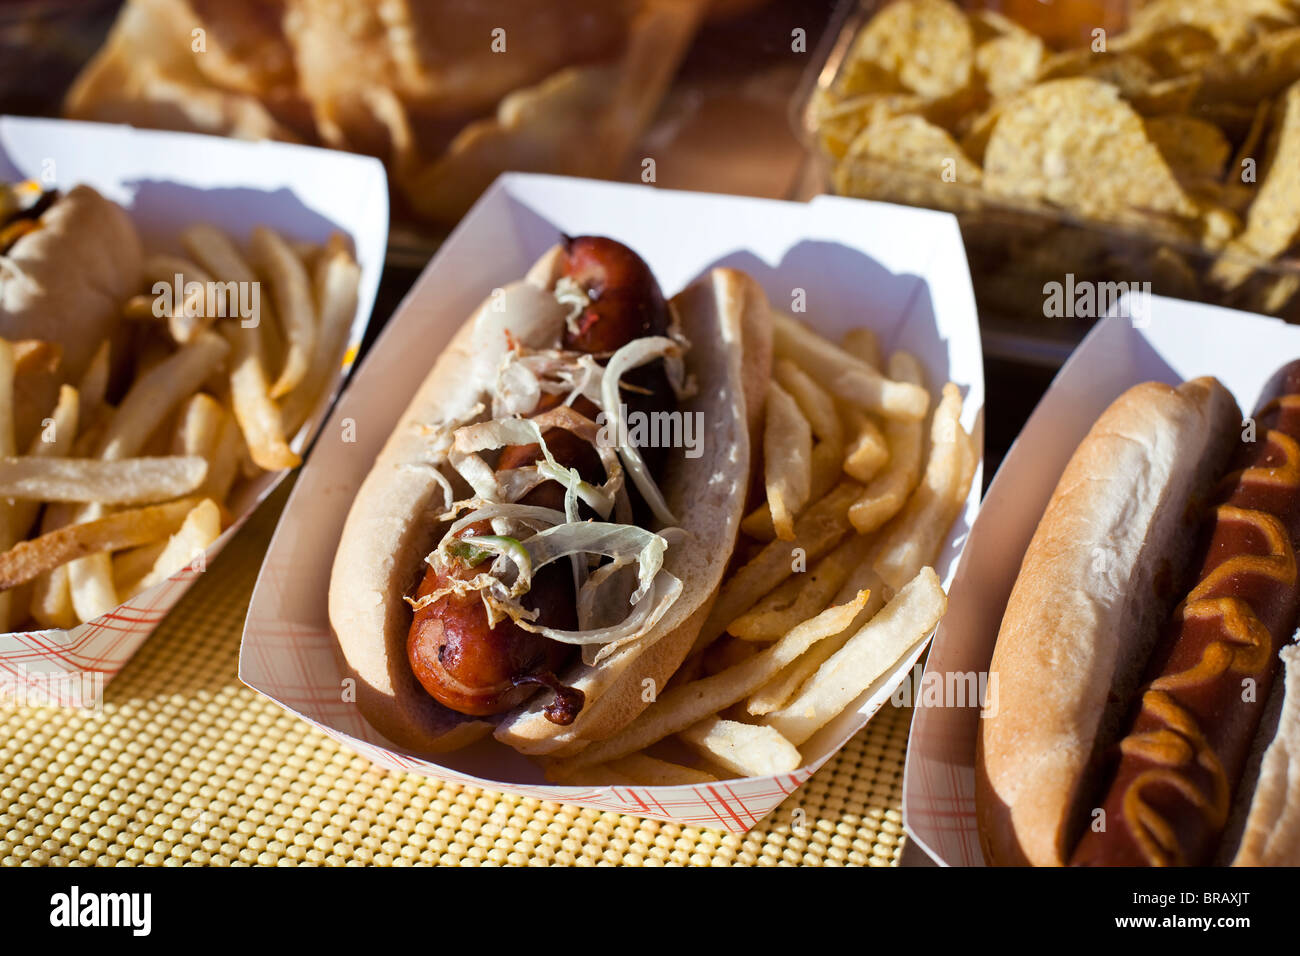 Hot dogs, sausages and french fries for sale at the country fair Stock Photo